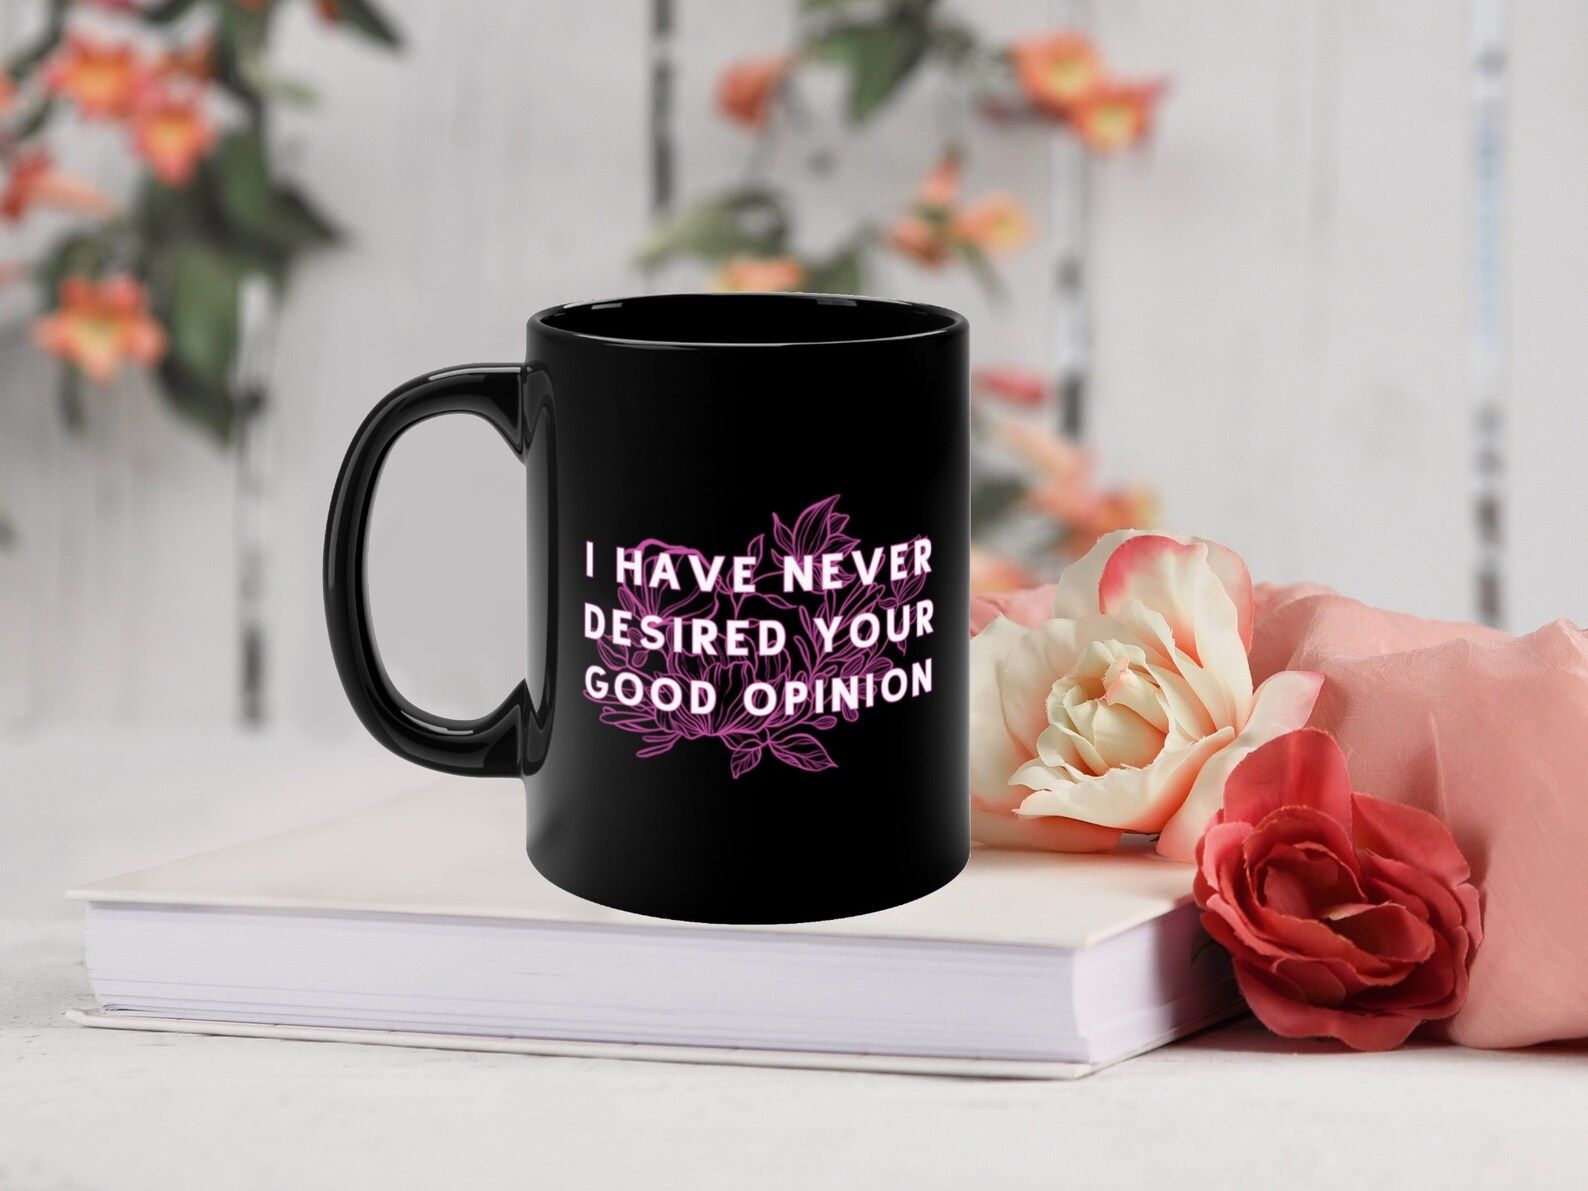 A black mug with pink flowers and the words "I have never desired your good opinion"